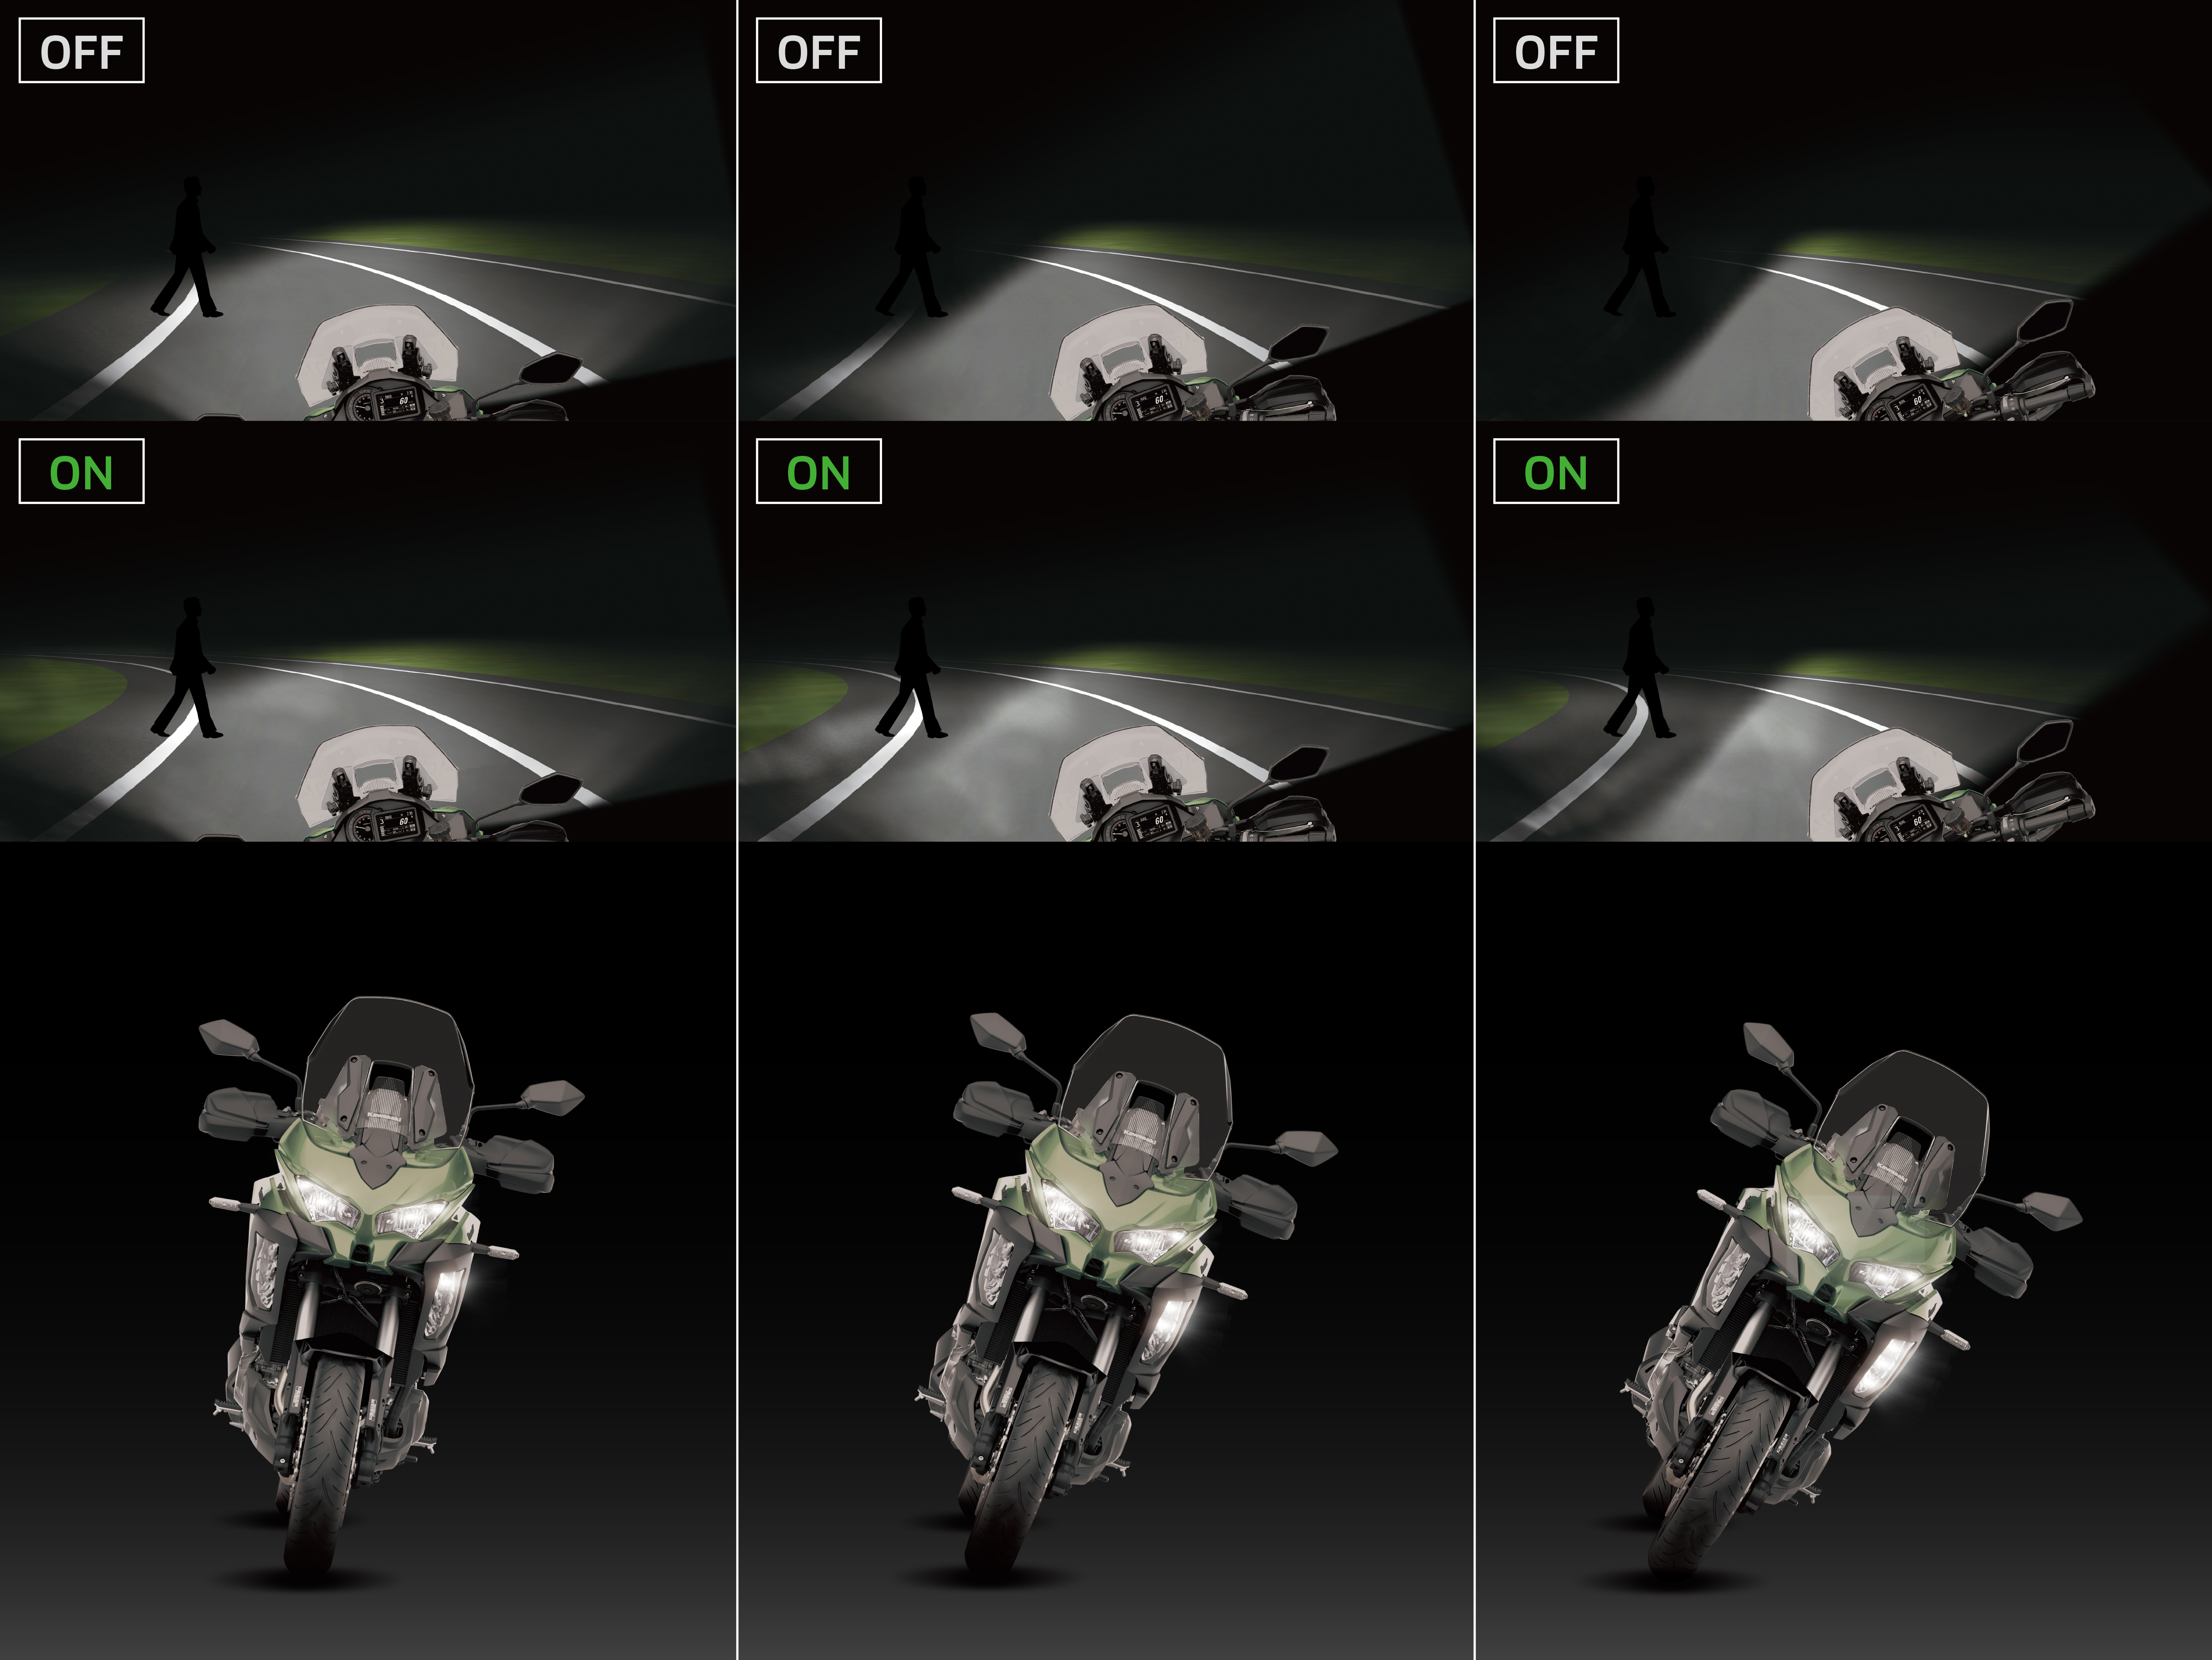 Motorcycle cornering lights on and off